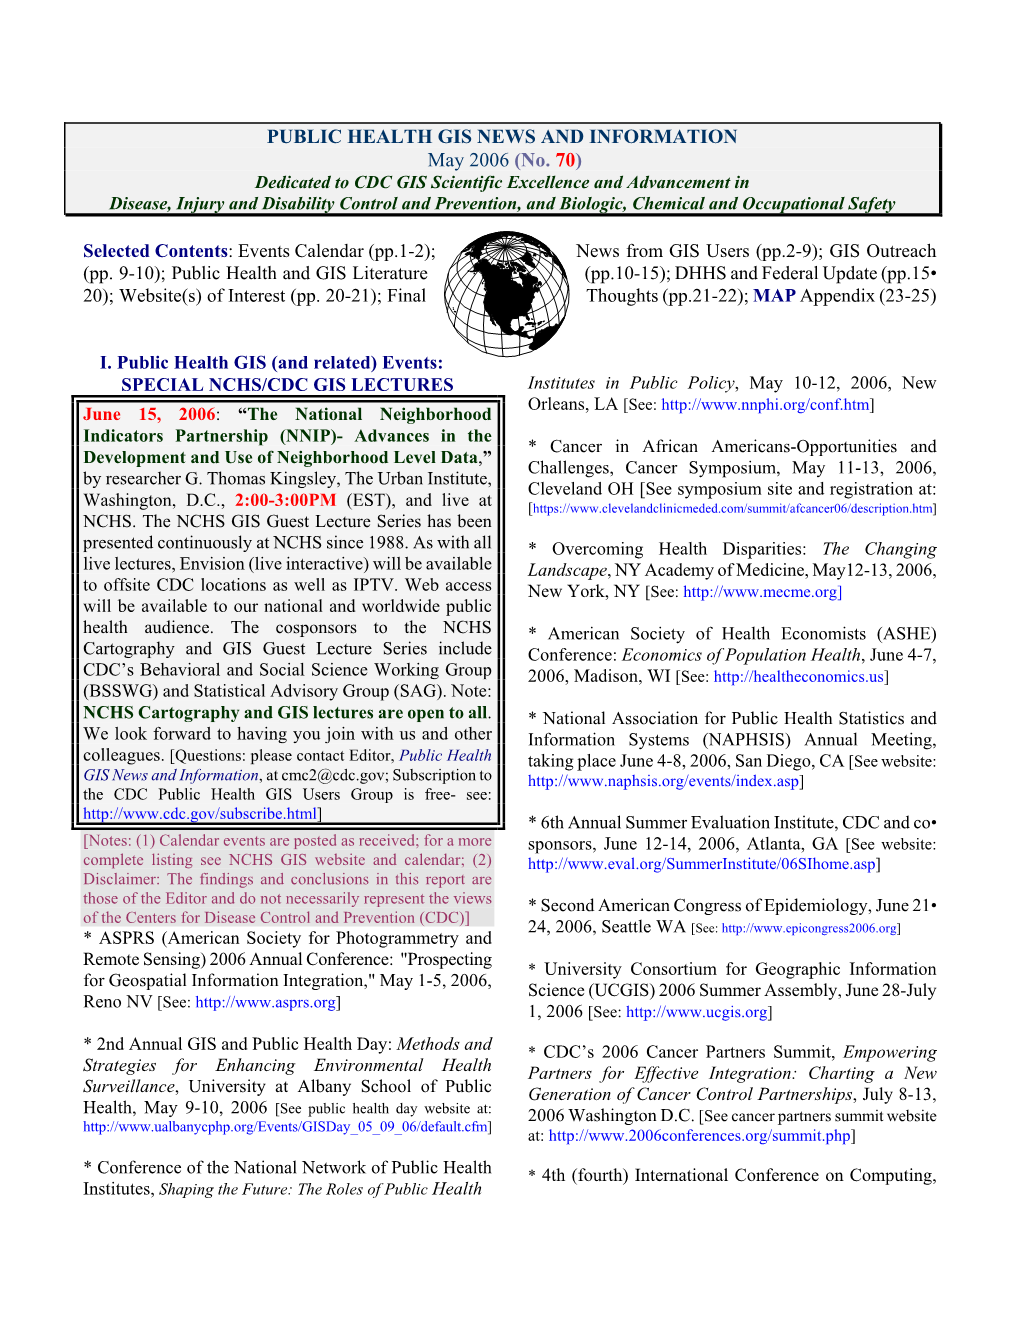 Public Health GIS News and Information, No. 70 (May 2006)